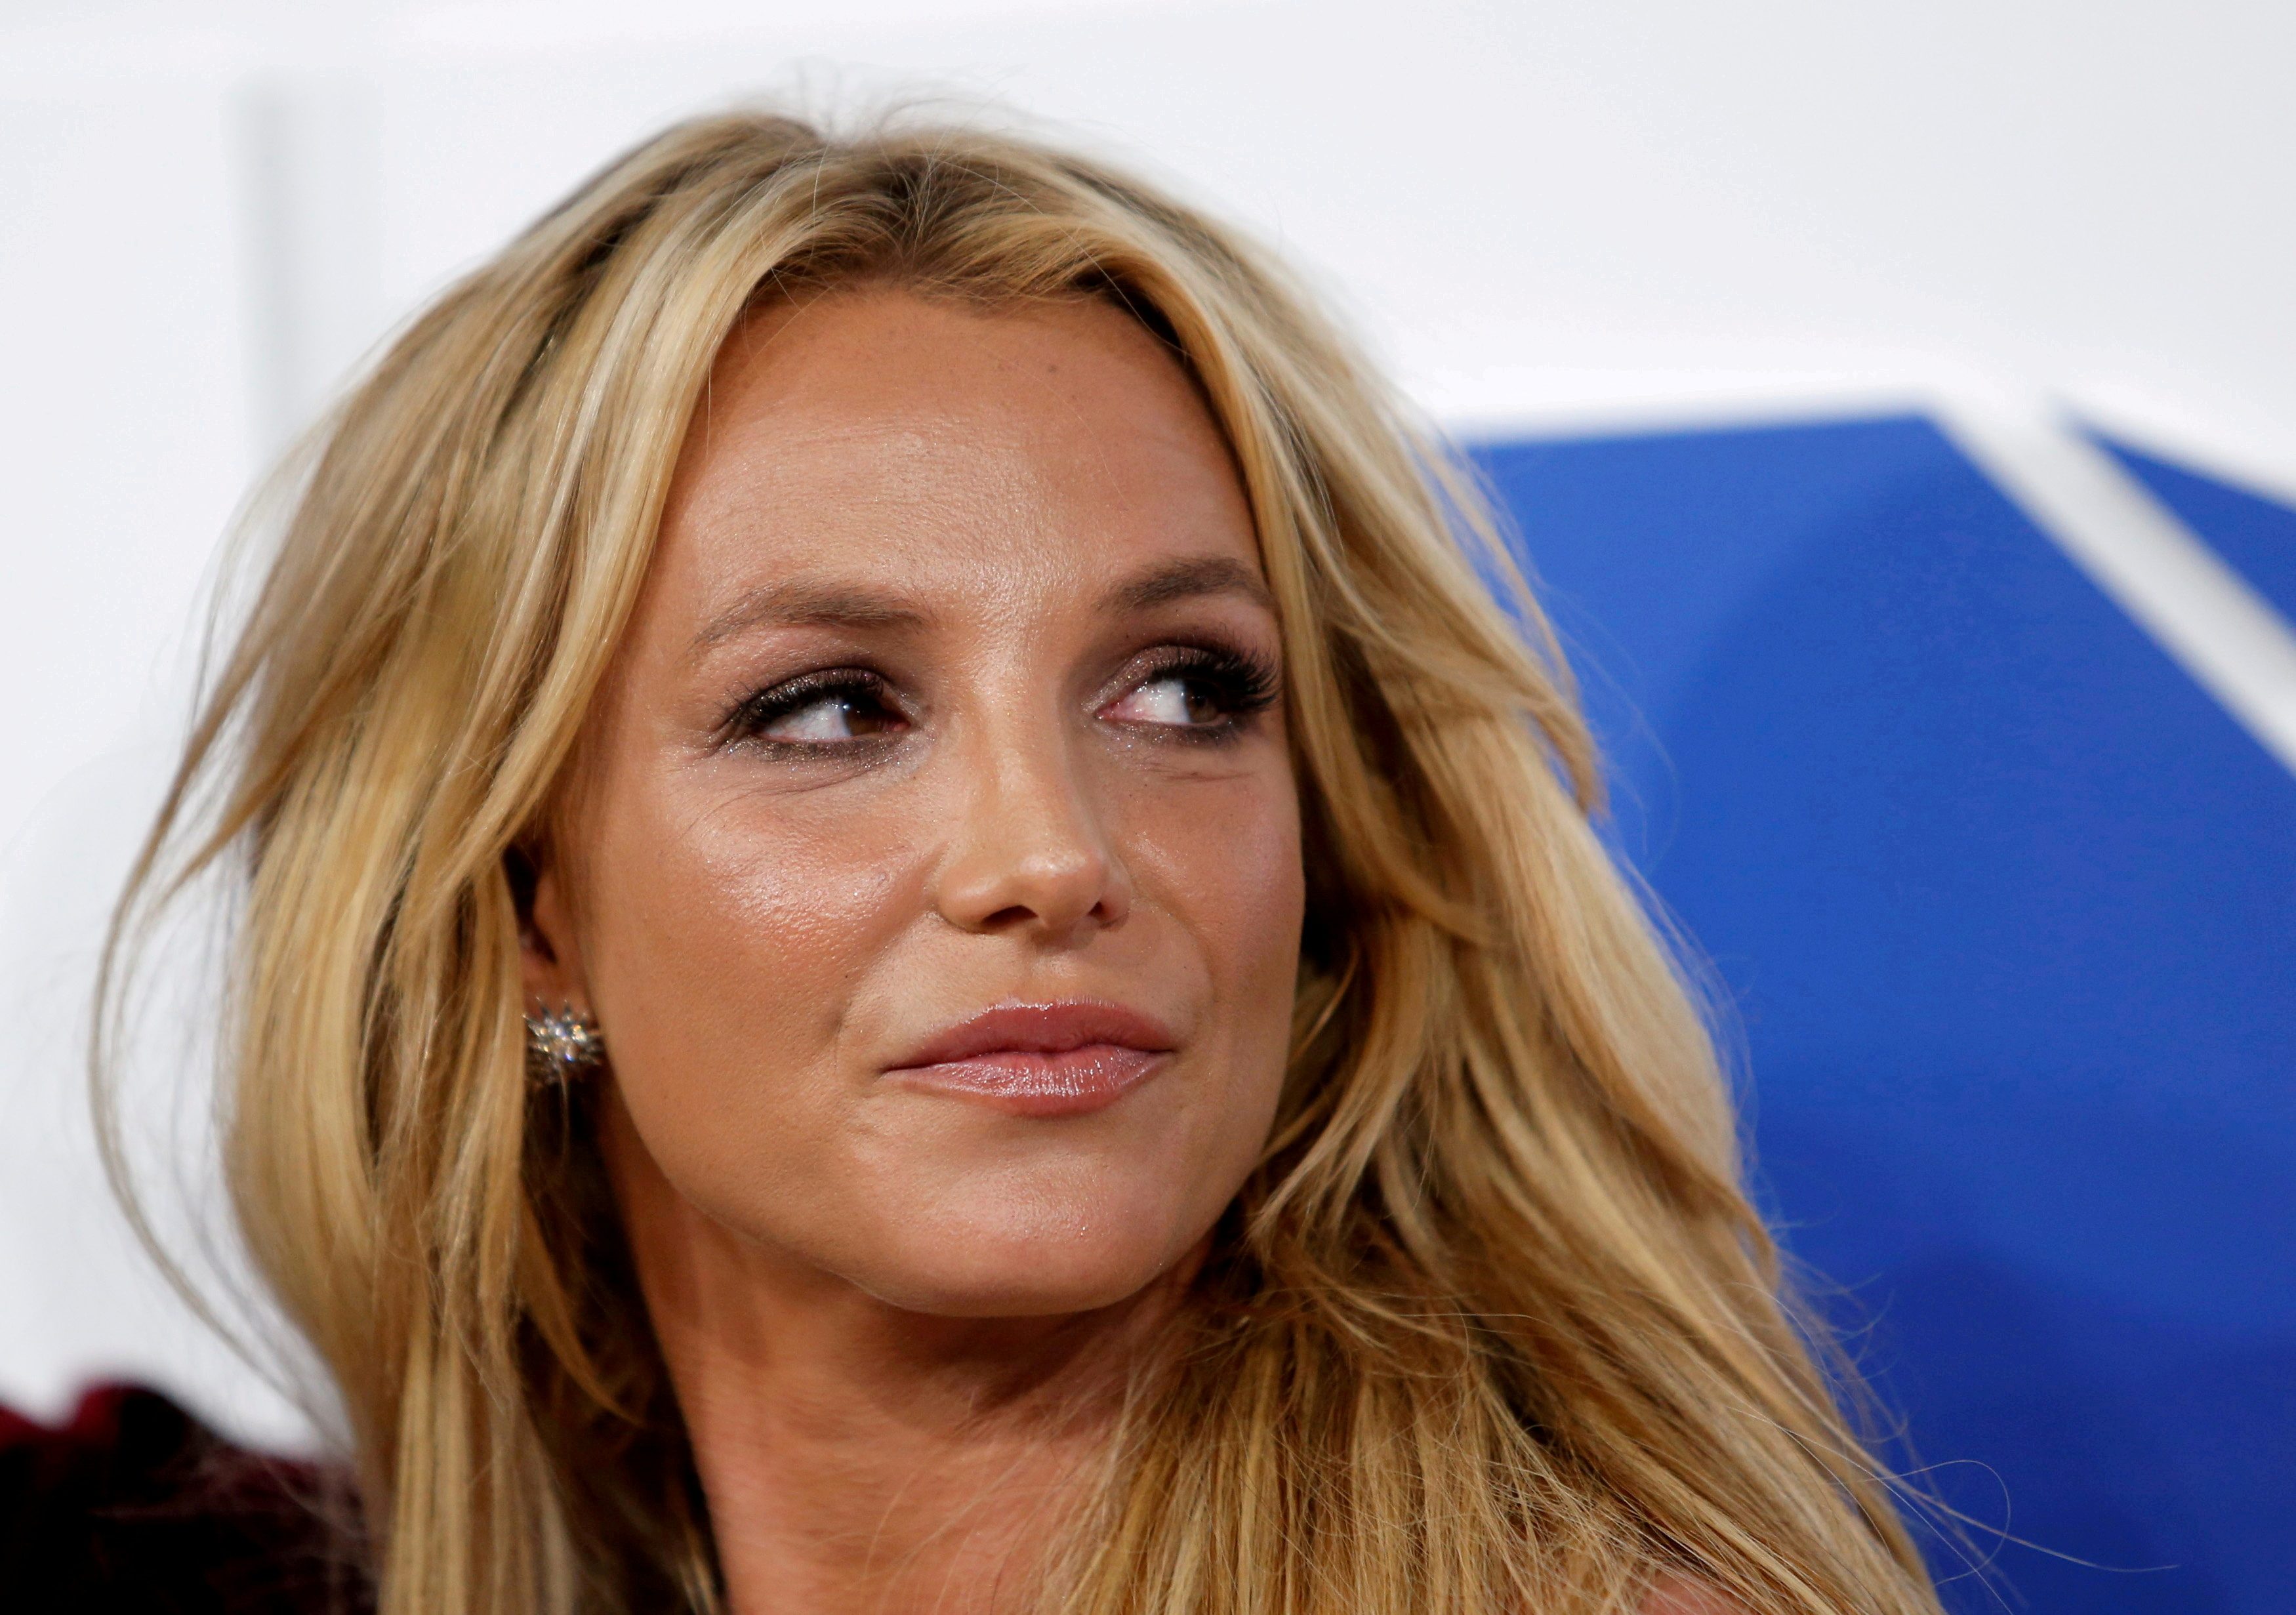 Angry and traumatized, Britney Spears calls conservatorship abusive